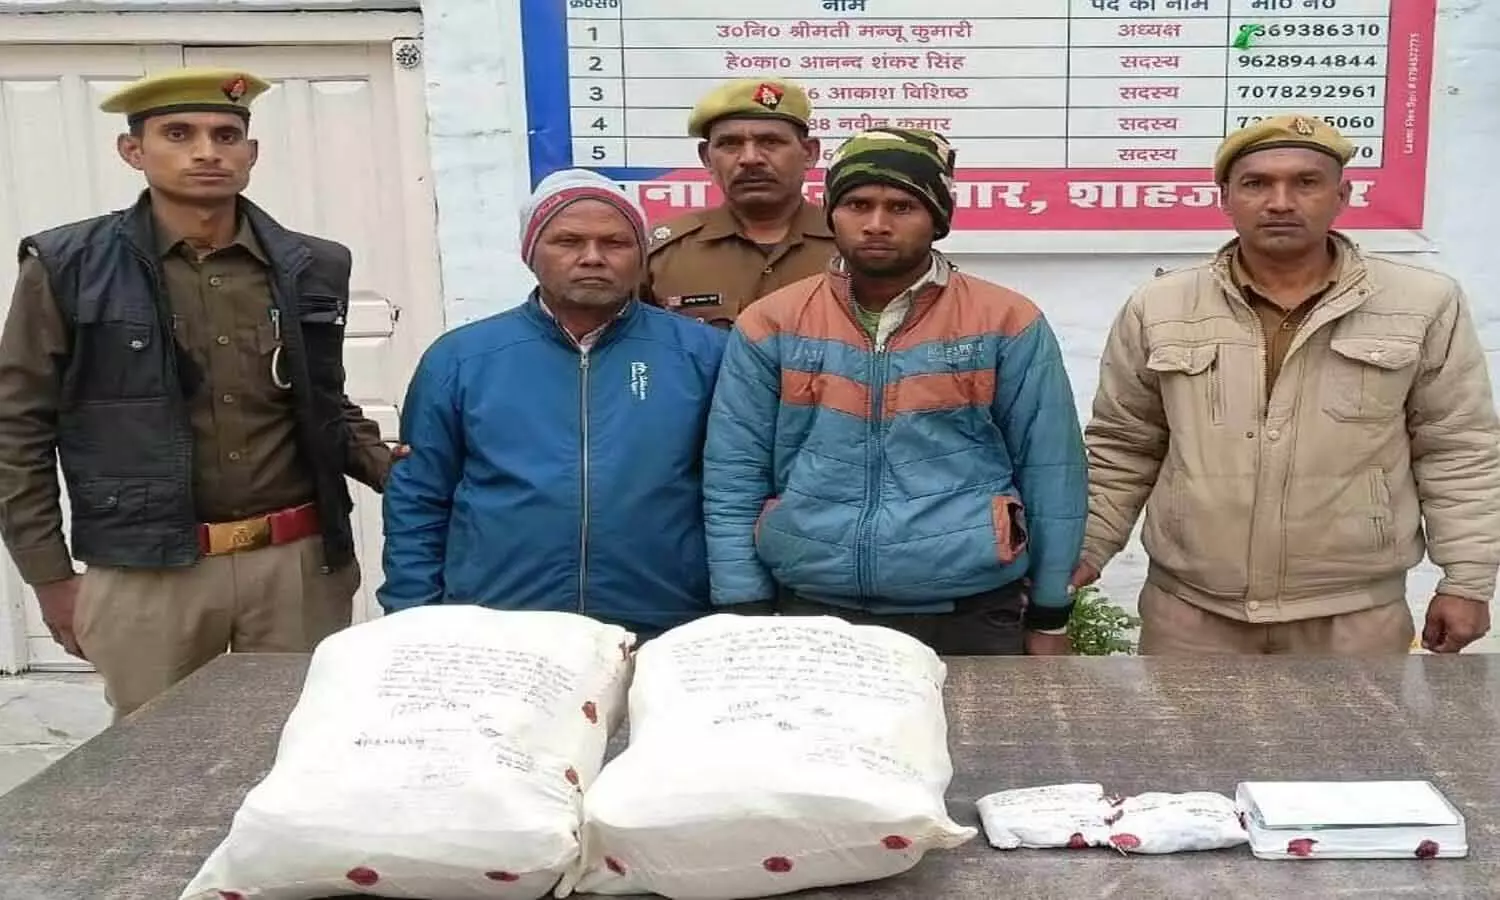 Two Bihar smugglers arrested with charas worth 44 crores in Shahjahanpur